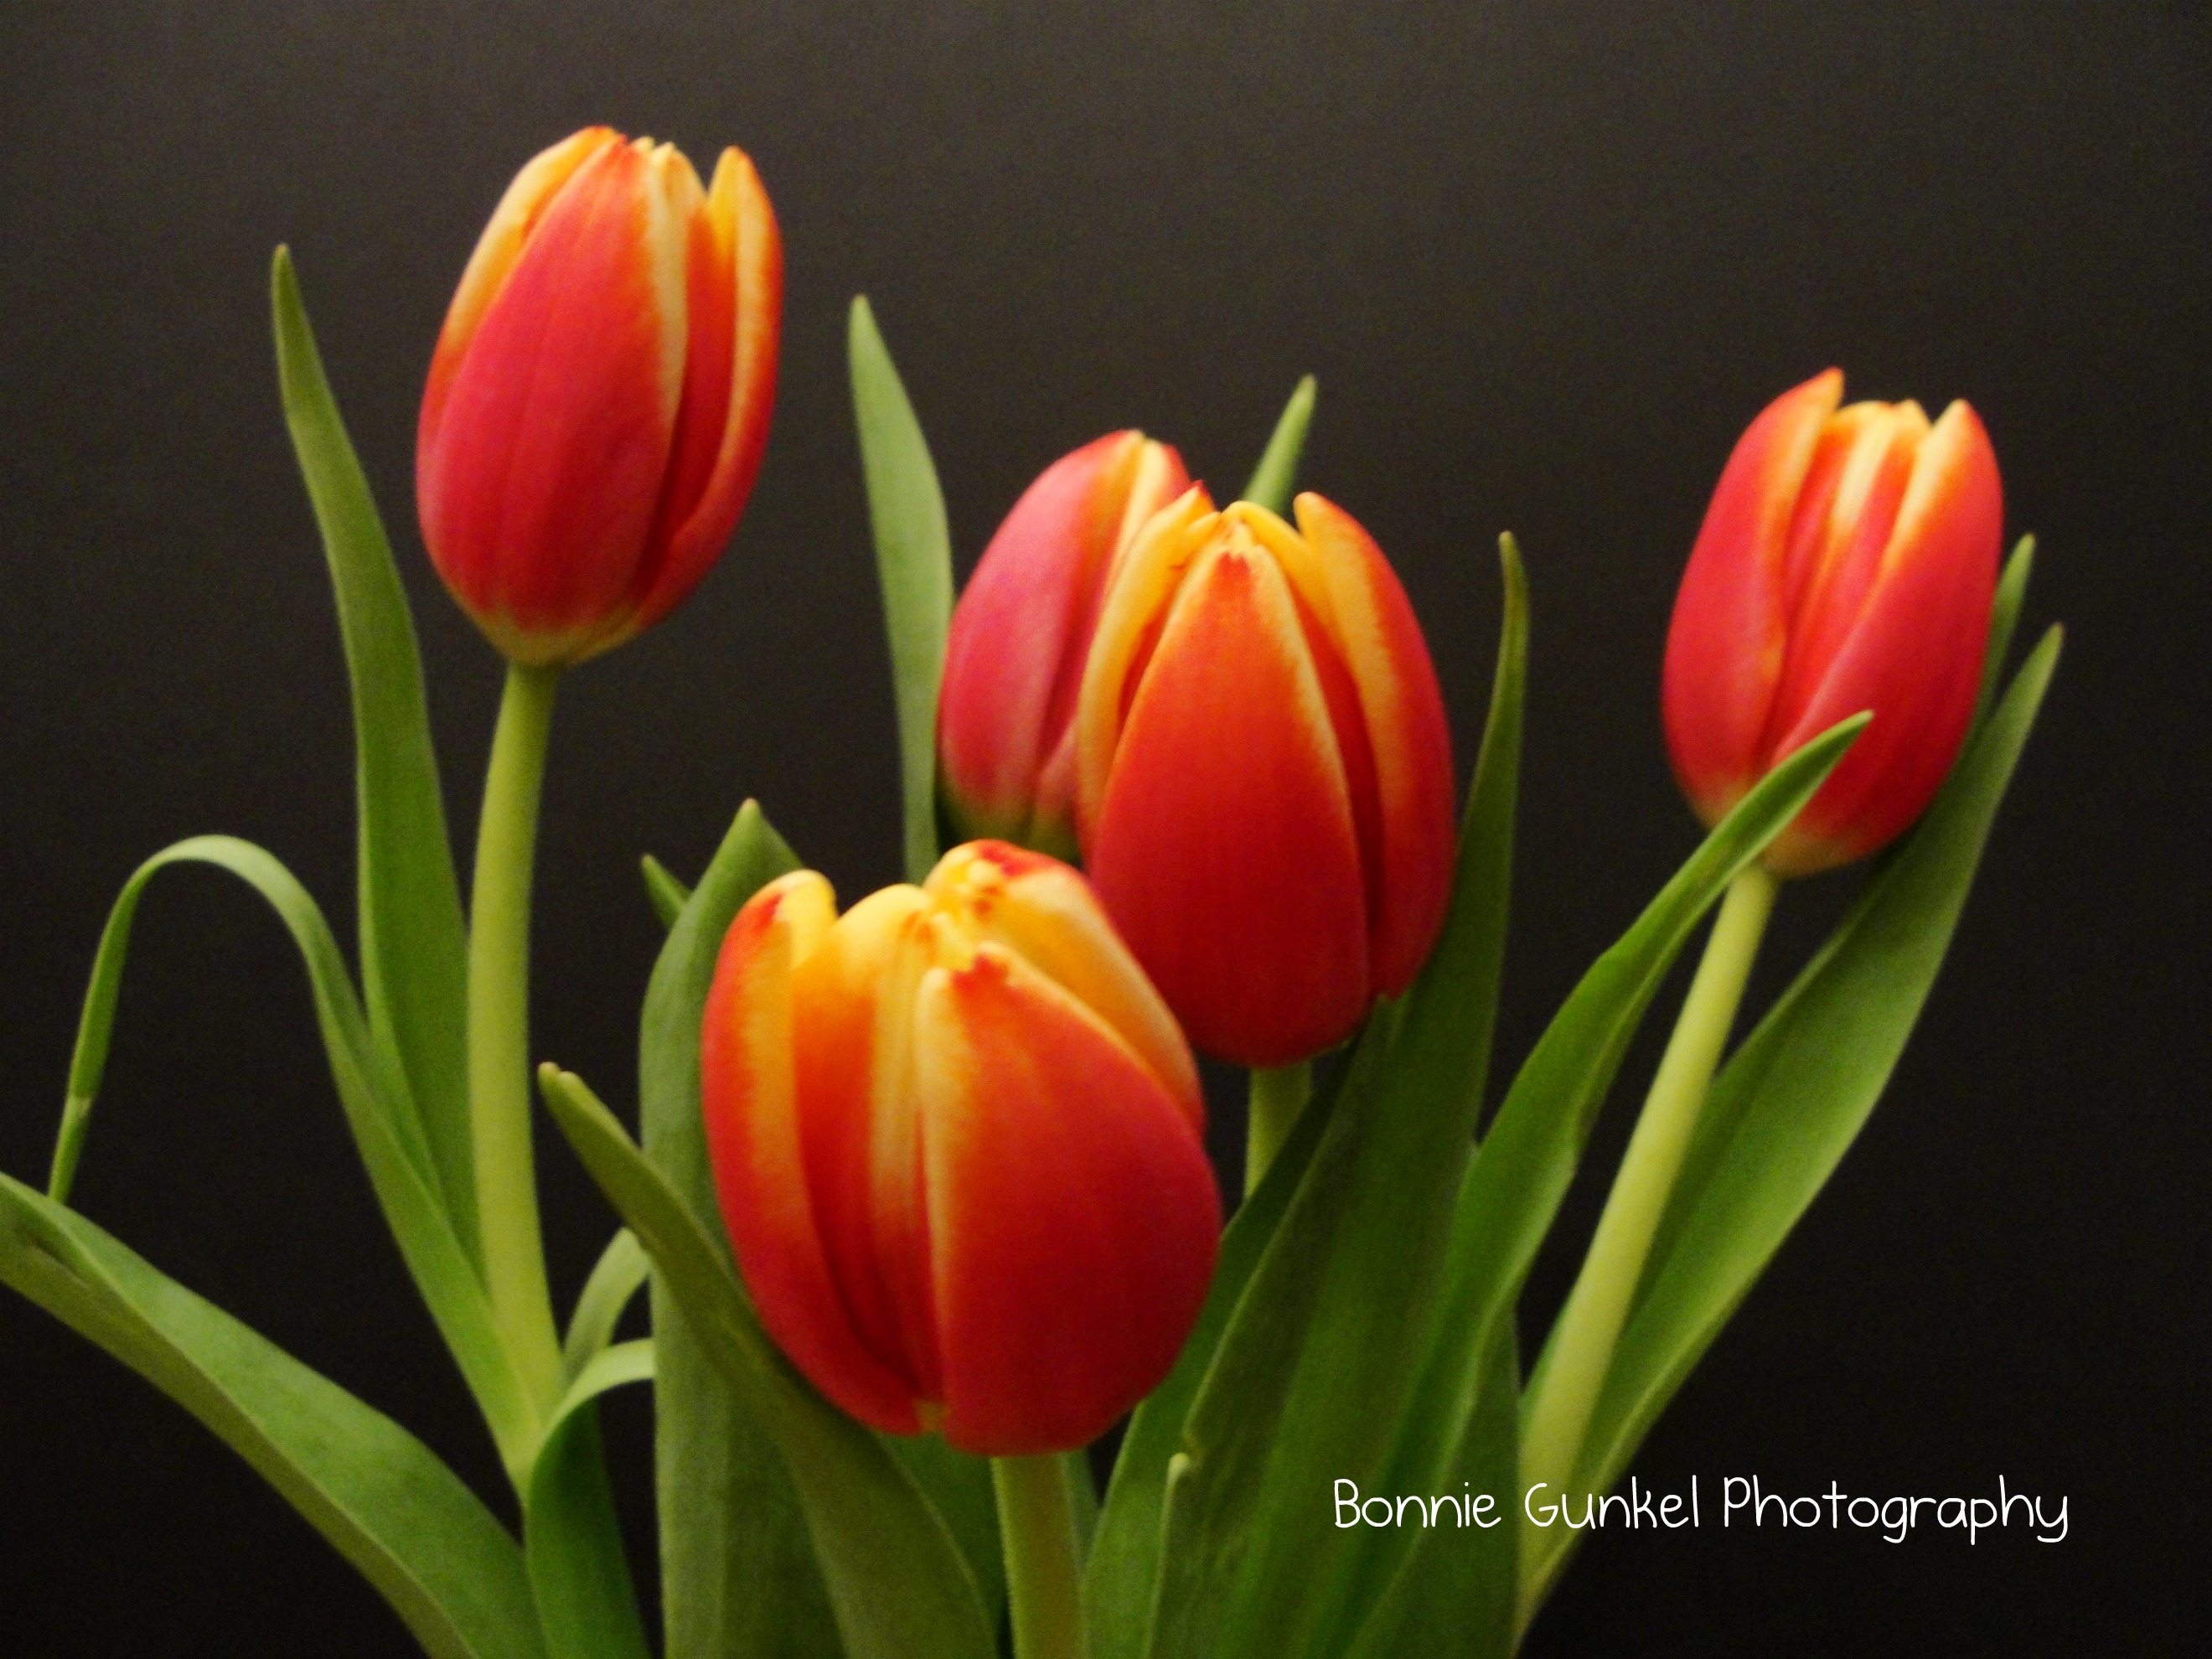 red and yellow tulips | All I've Got is a Photograph...